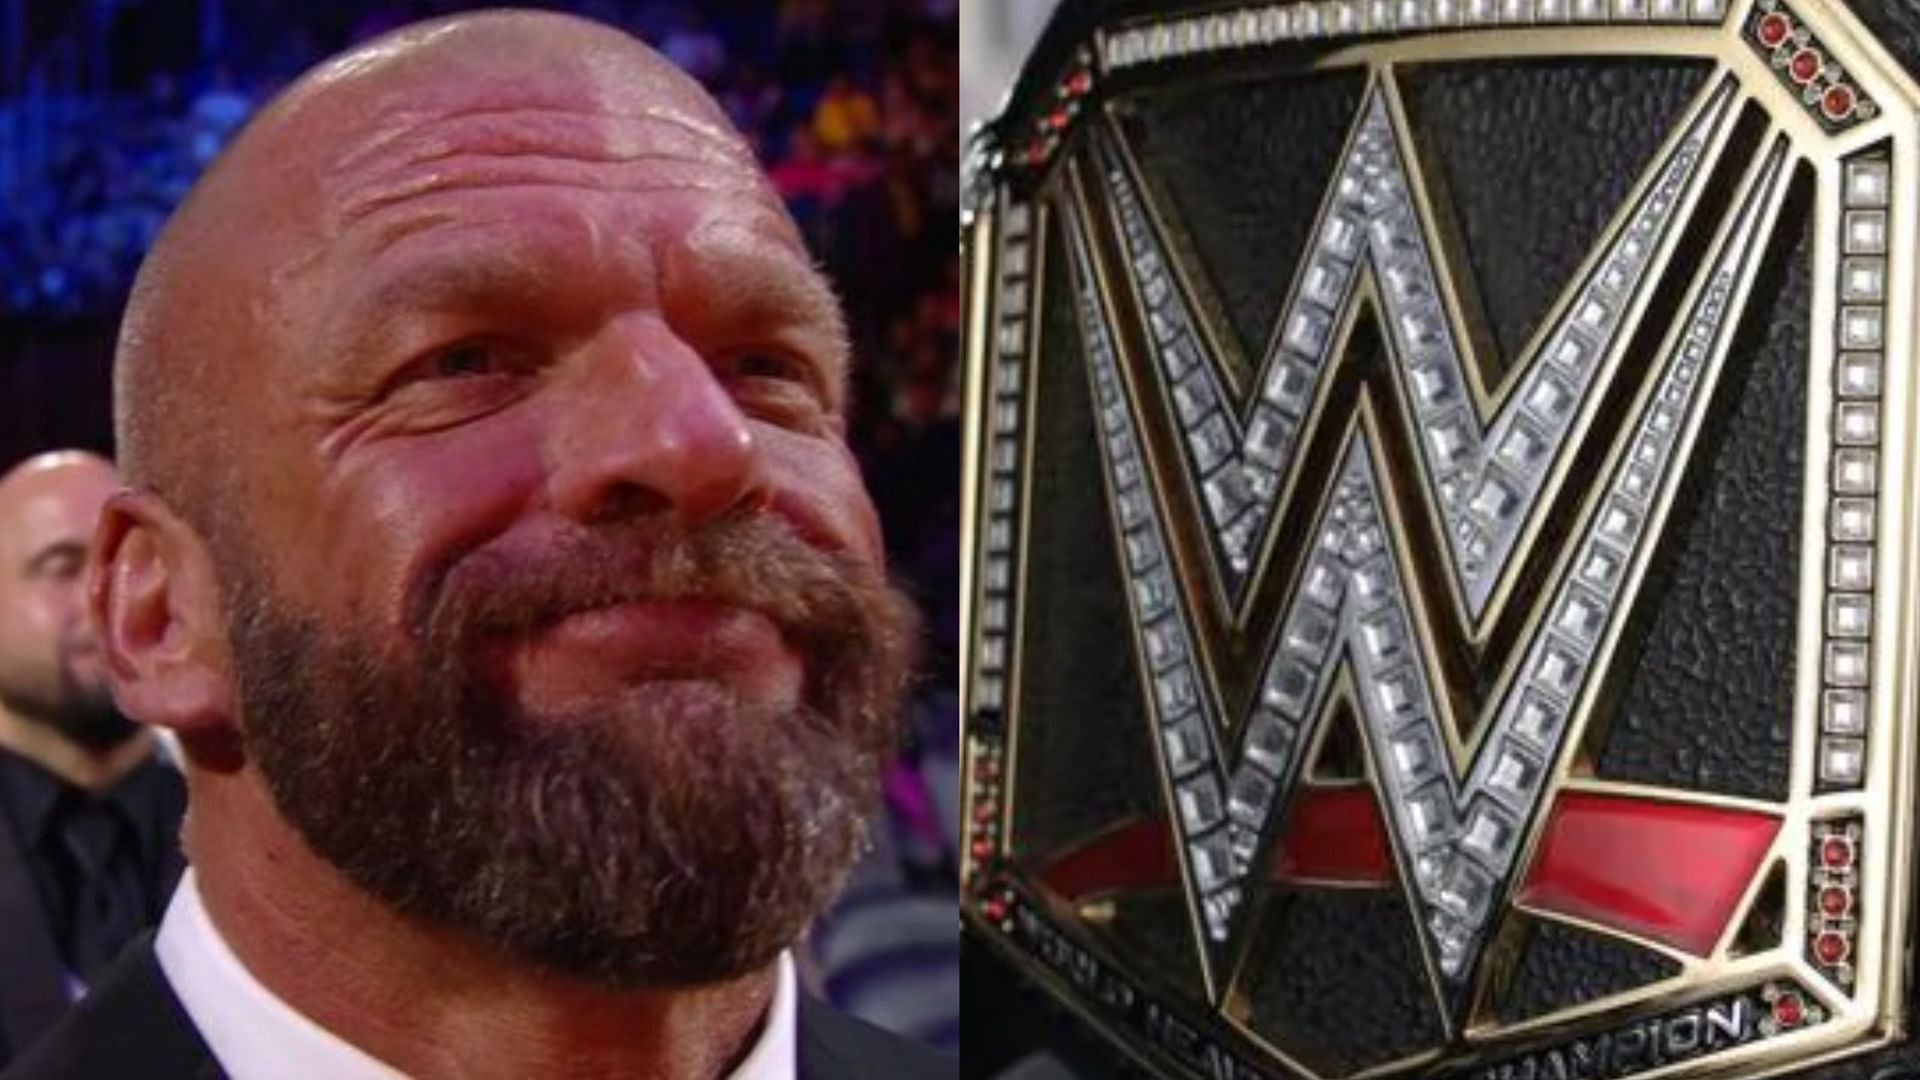 Could Triple H take a former WWE champion away from AEW?